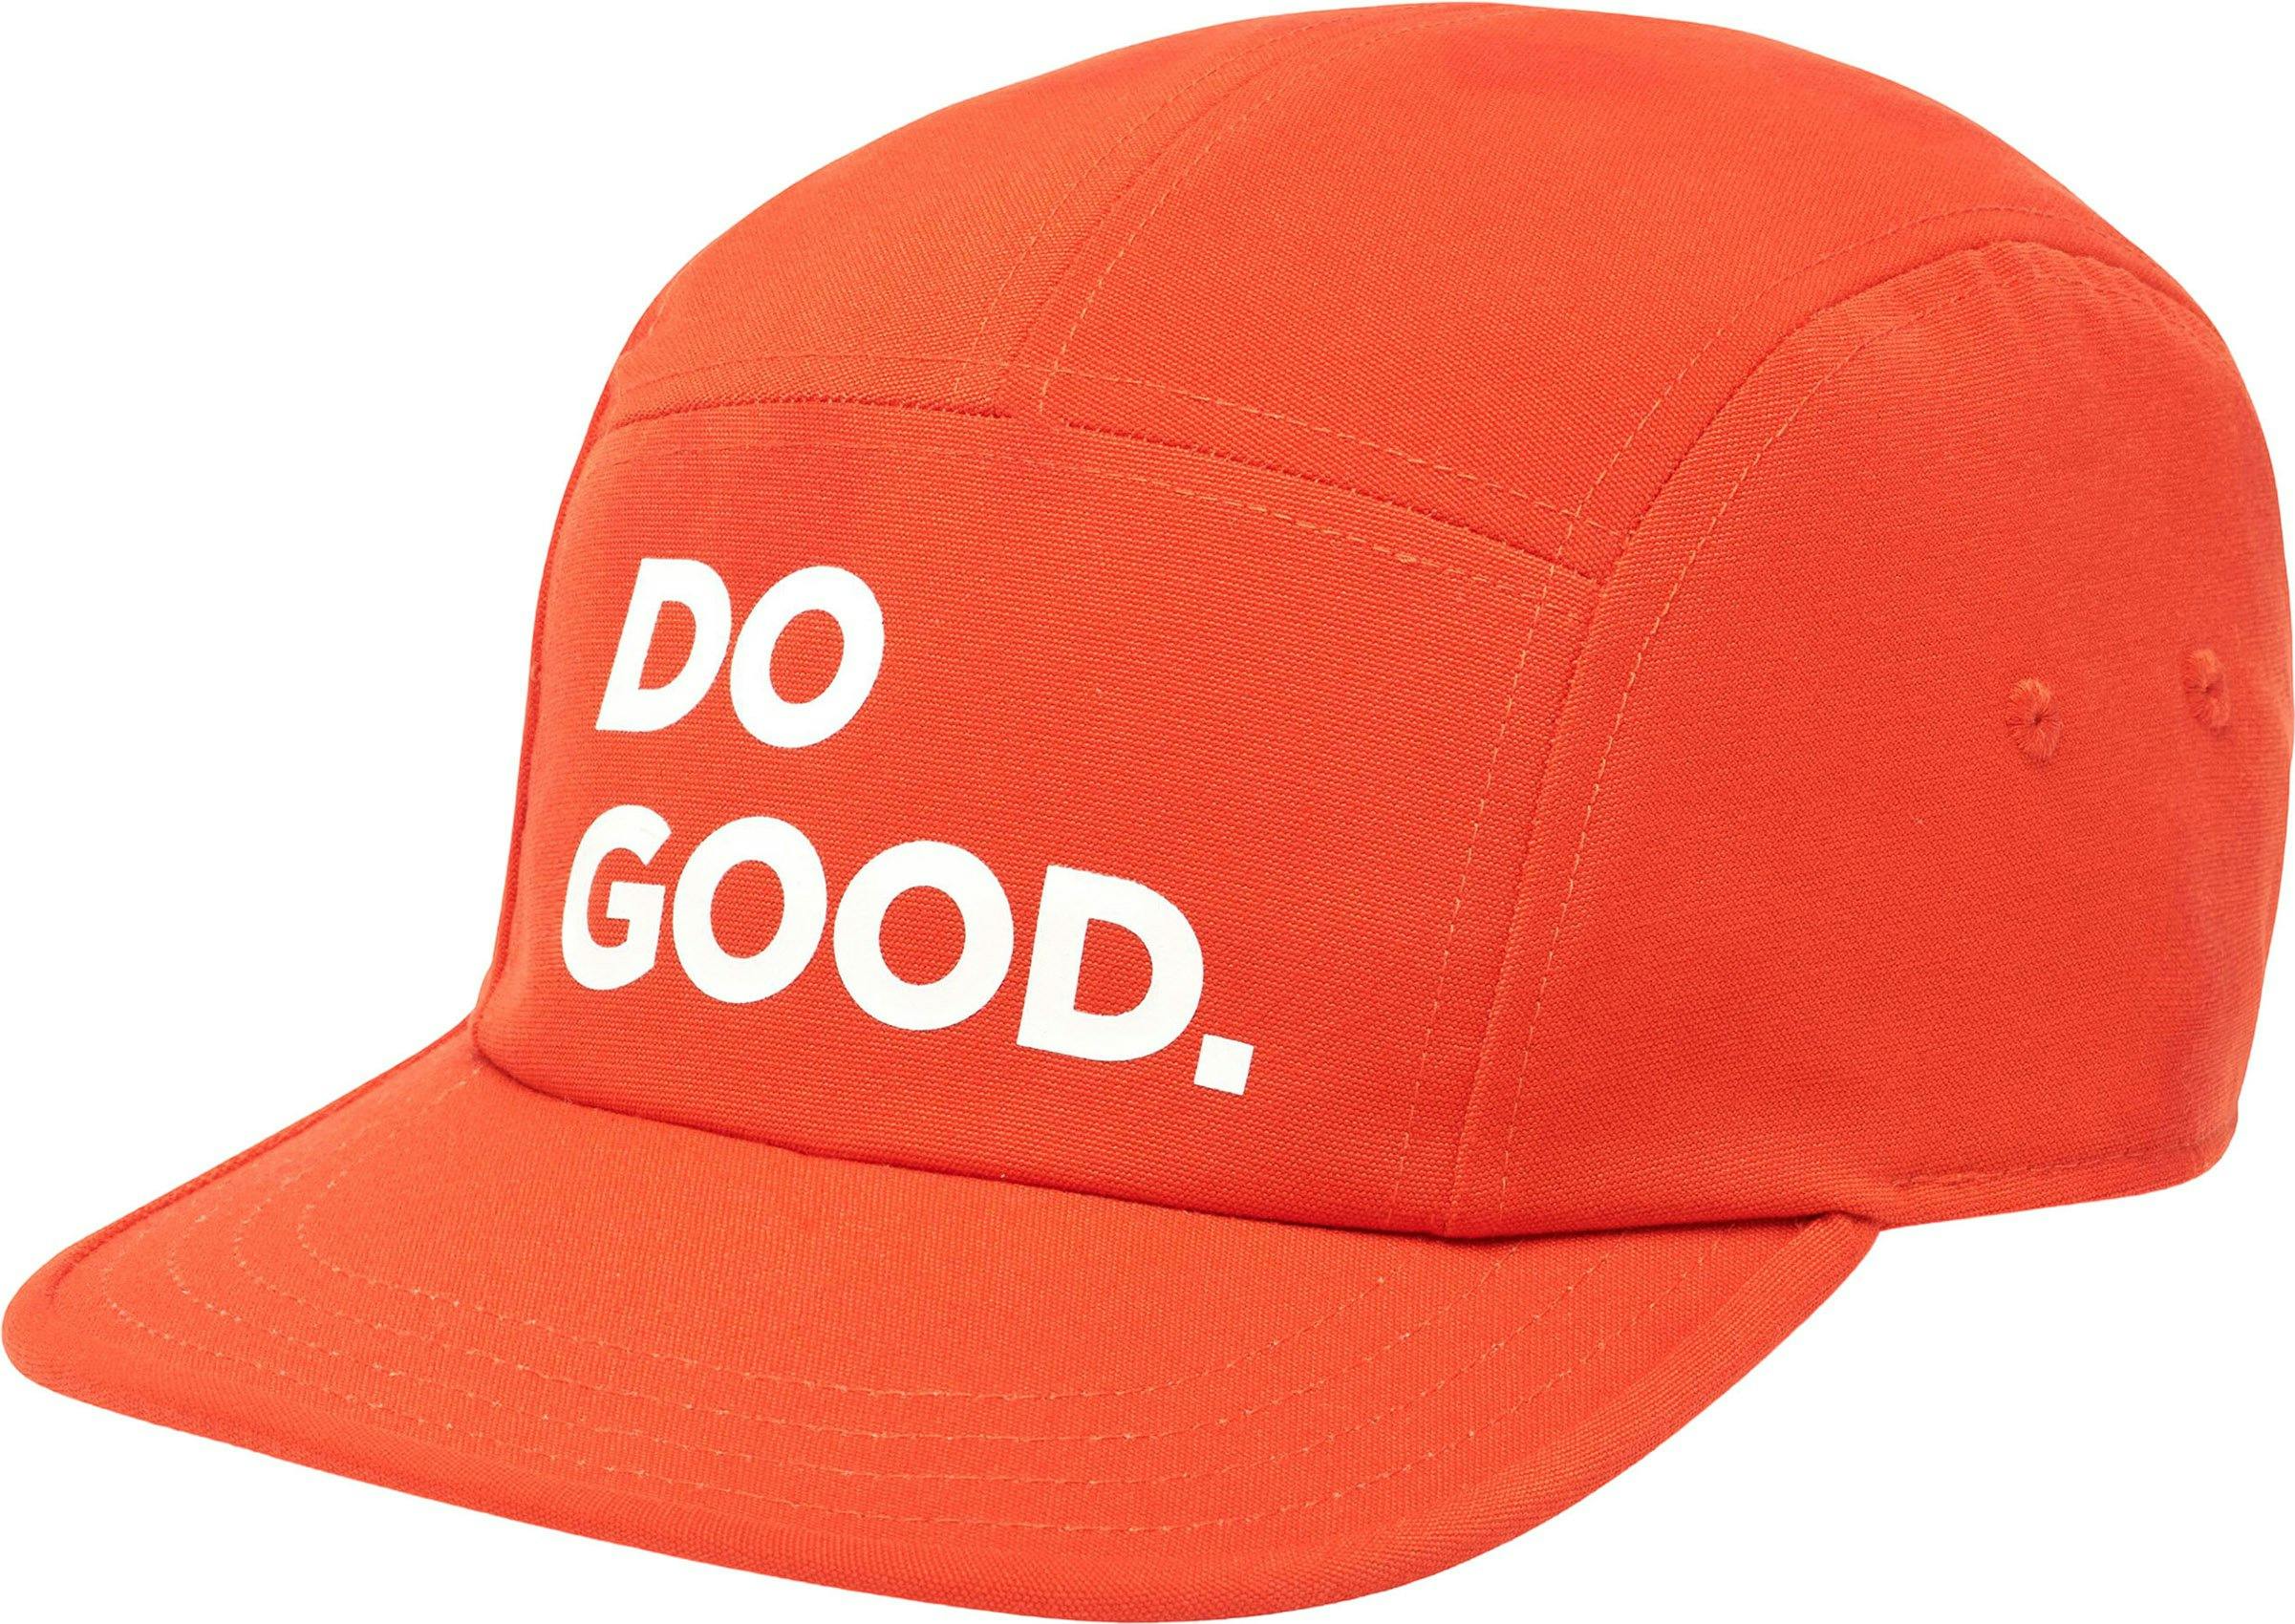 Product image for Do Good 5 Panel Hat - Unisex